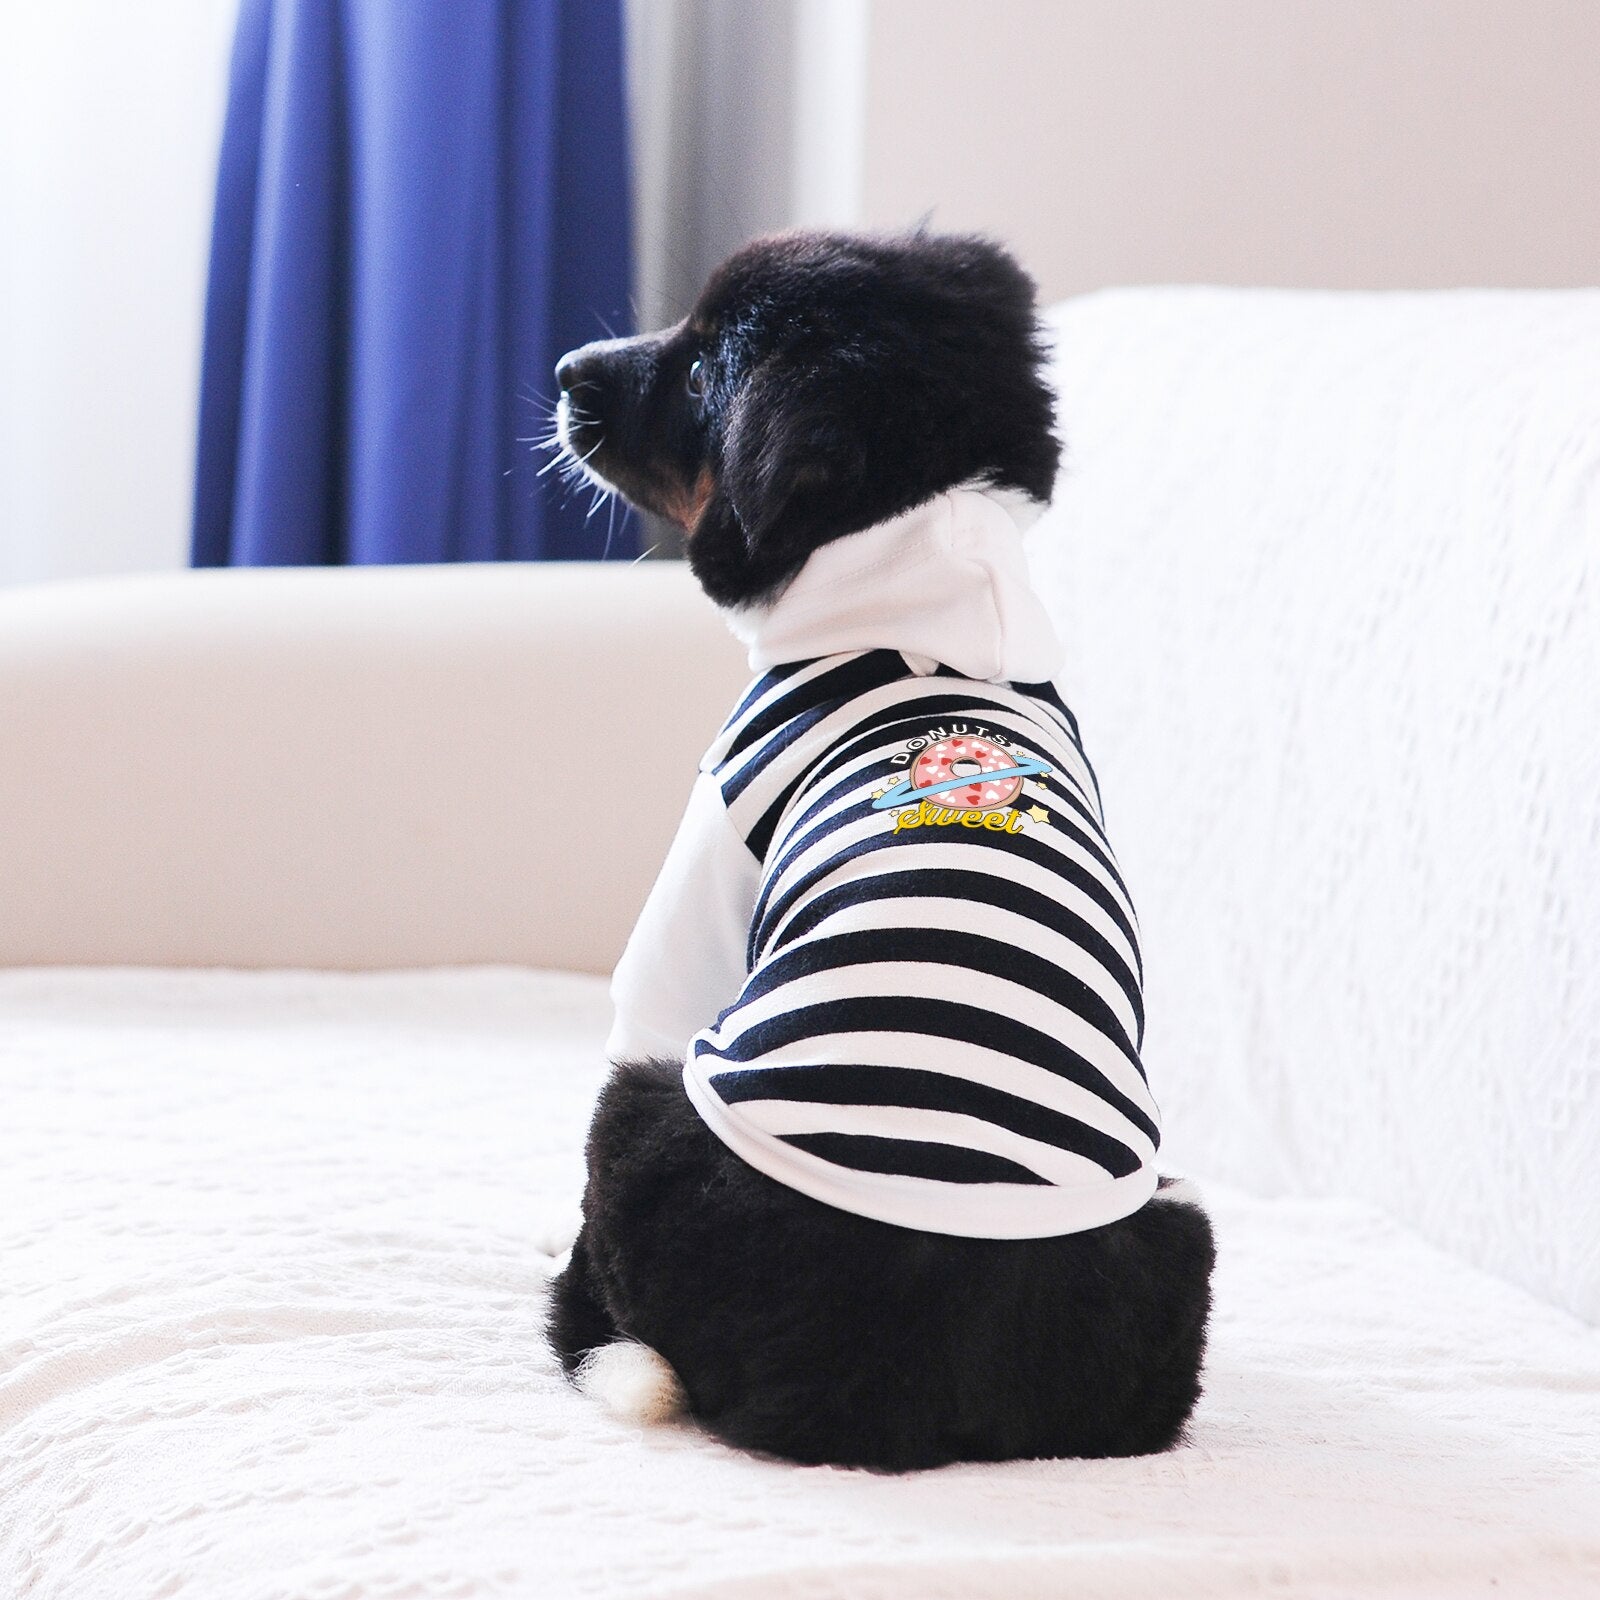 Pattern Printed Stripe Pet Hoodies White and Red, Leash Hole Under the Hood, Cotton Fabric Autumn Winter to Keep Warm